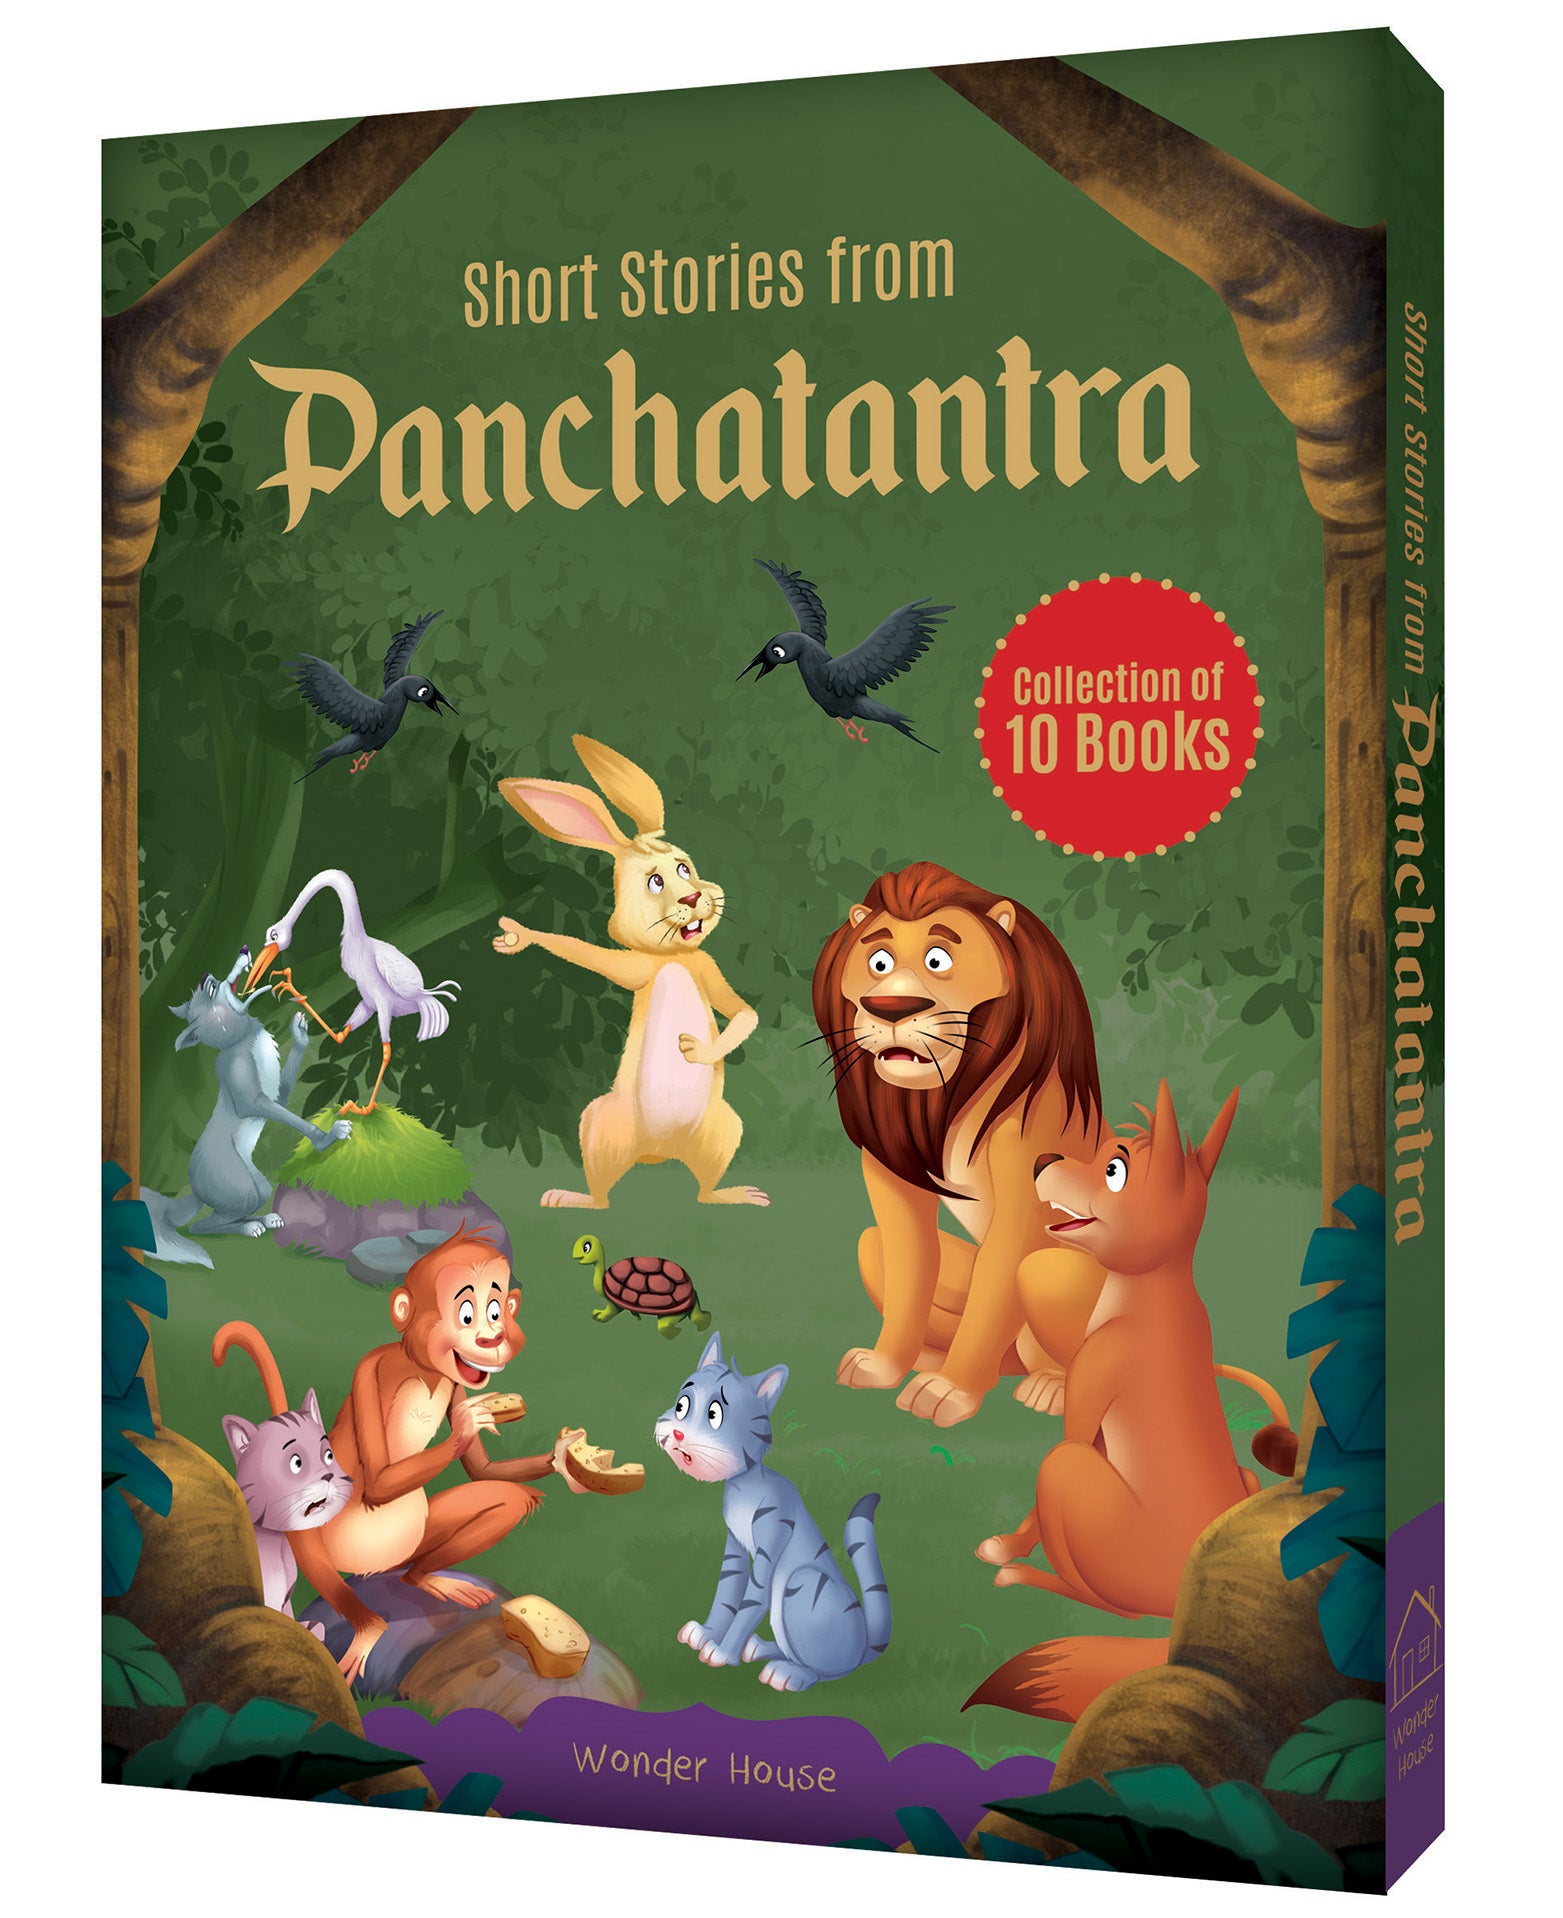 Short Stories From Panchatantra - Collection of 10 Books: Abridged Illustrated Stories For Children (With Morals)